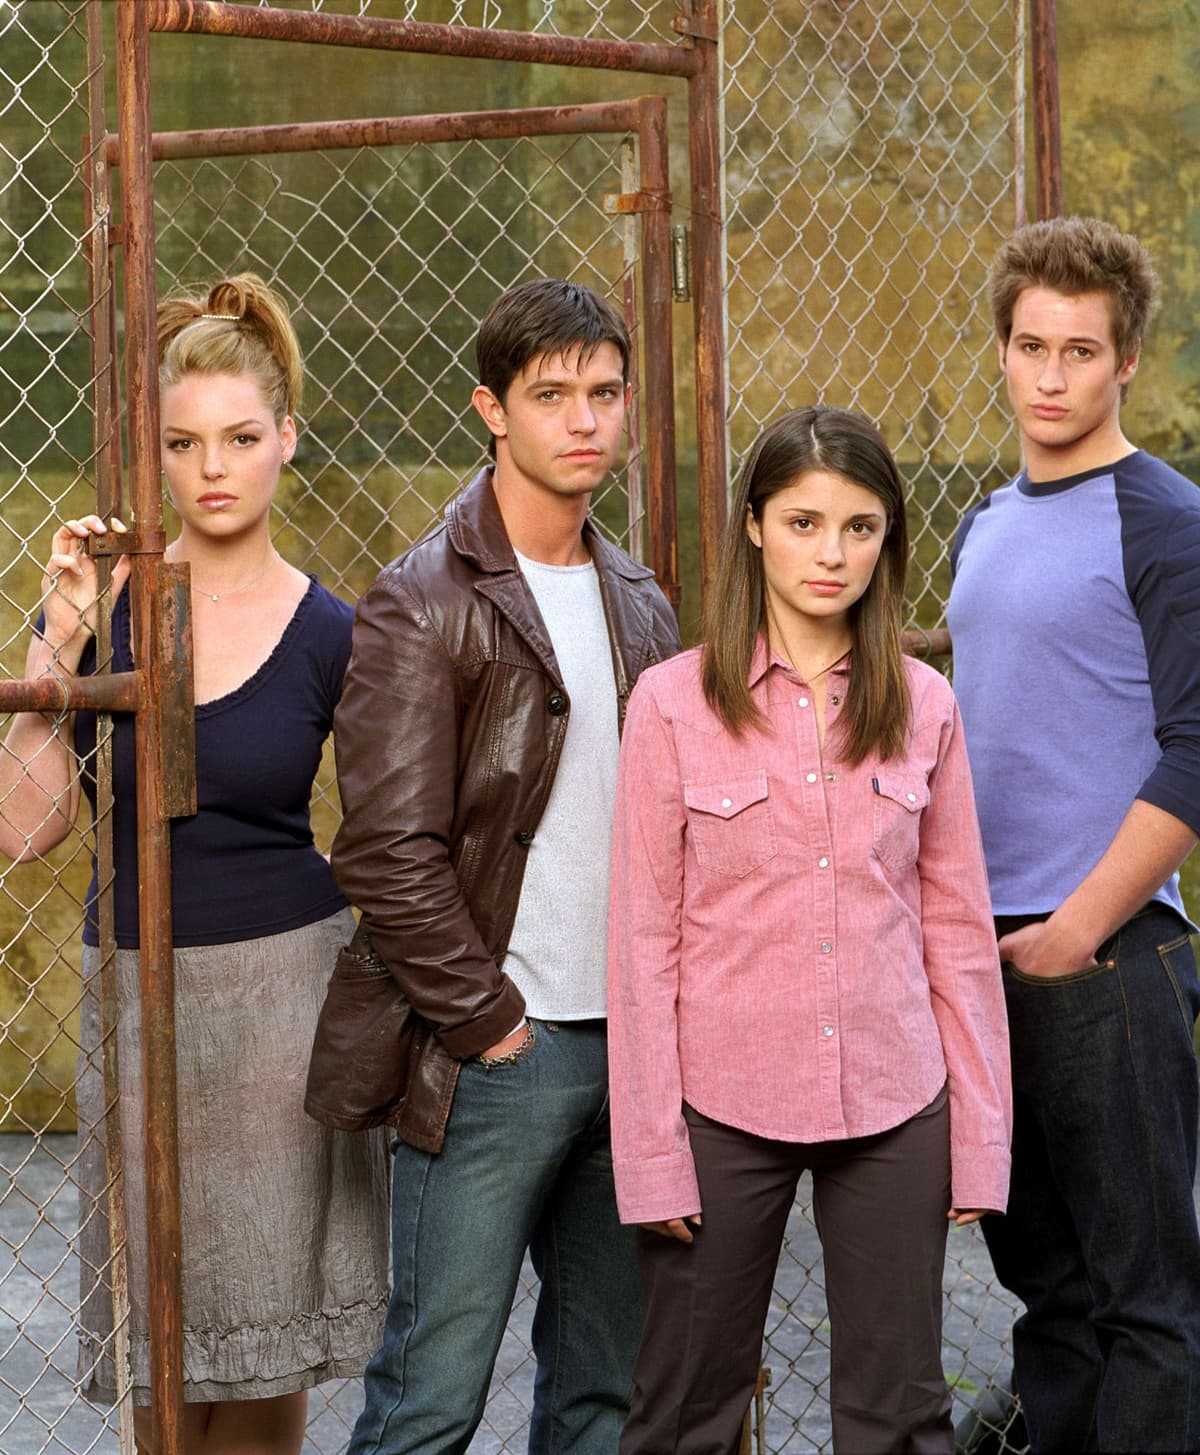 Katherine Heigl as Isabel Evans, Shiri Appleby as Liz Parker, Jason Behr as Max Evans, and Brendan Fehr as Michael Guerin in the American science fiction television series Roswell